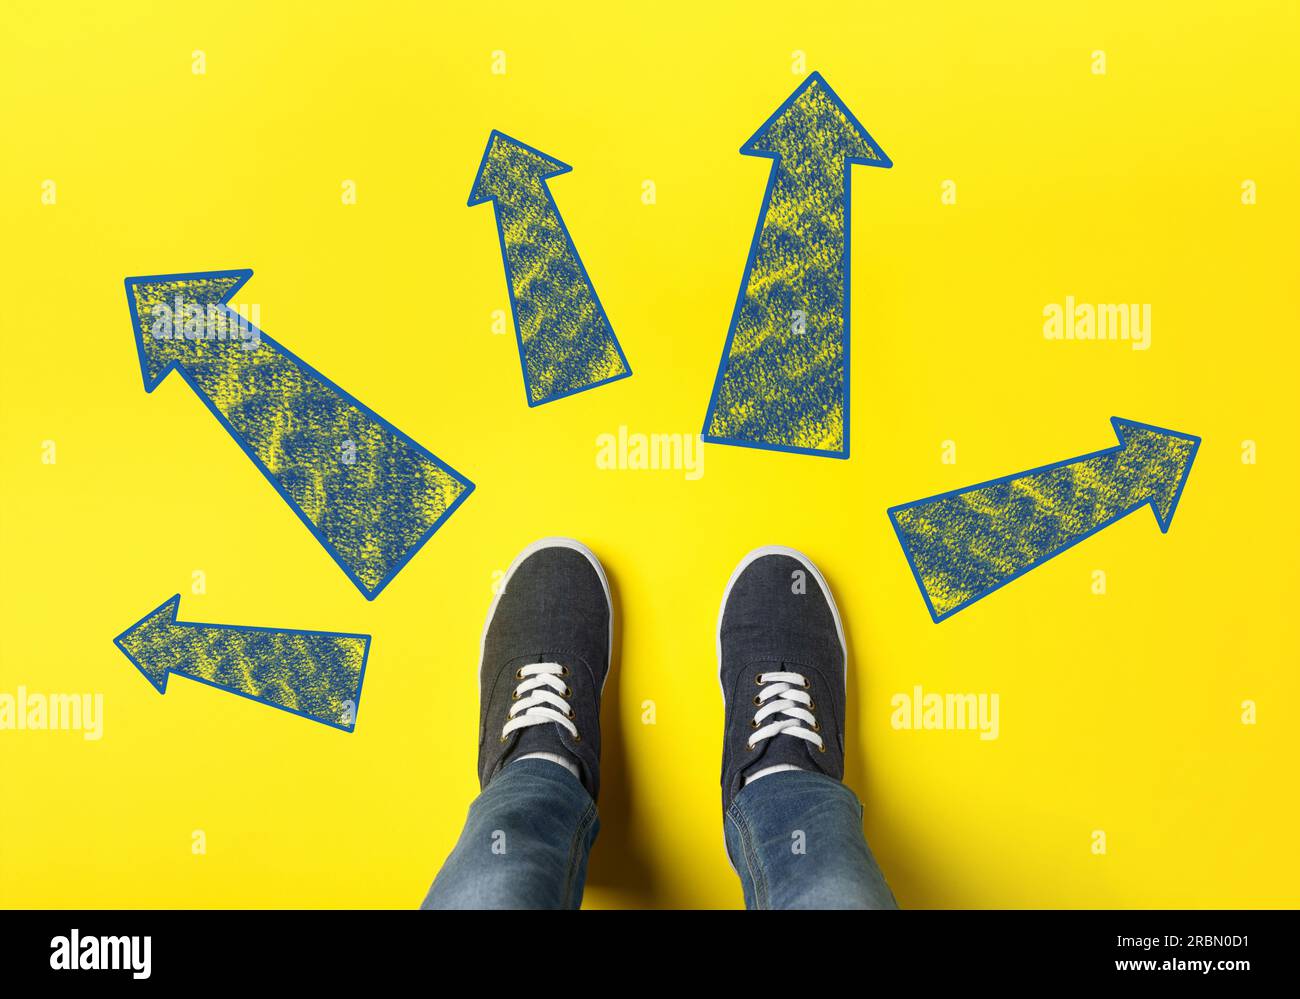 Choosing future profession. Teenager standing in front of drawn signs on yellow background, top view. Arrows pointing in different directions symboliz Stock Photo